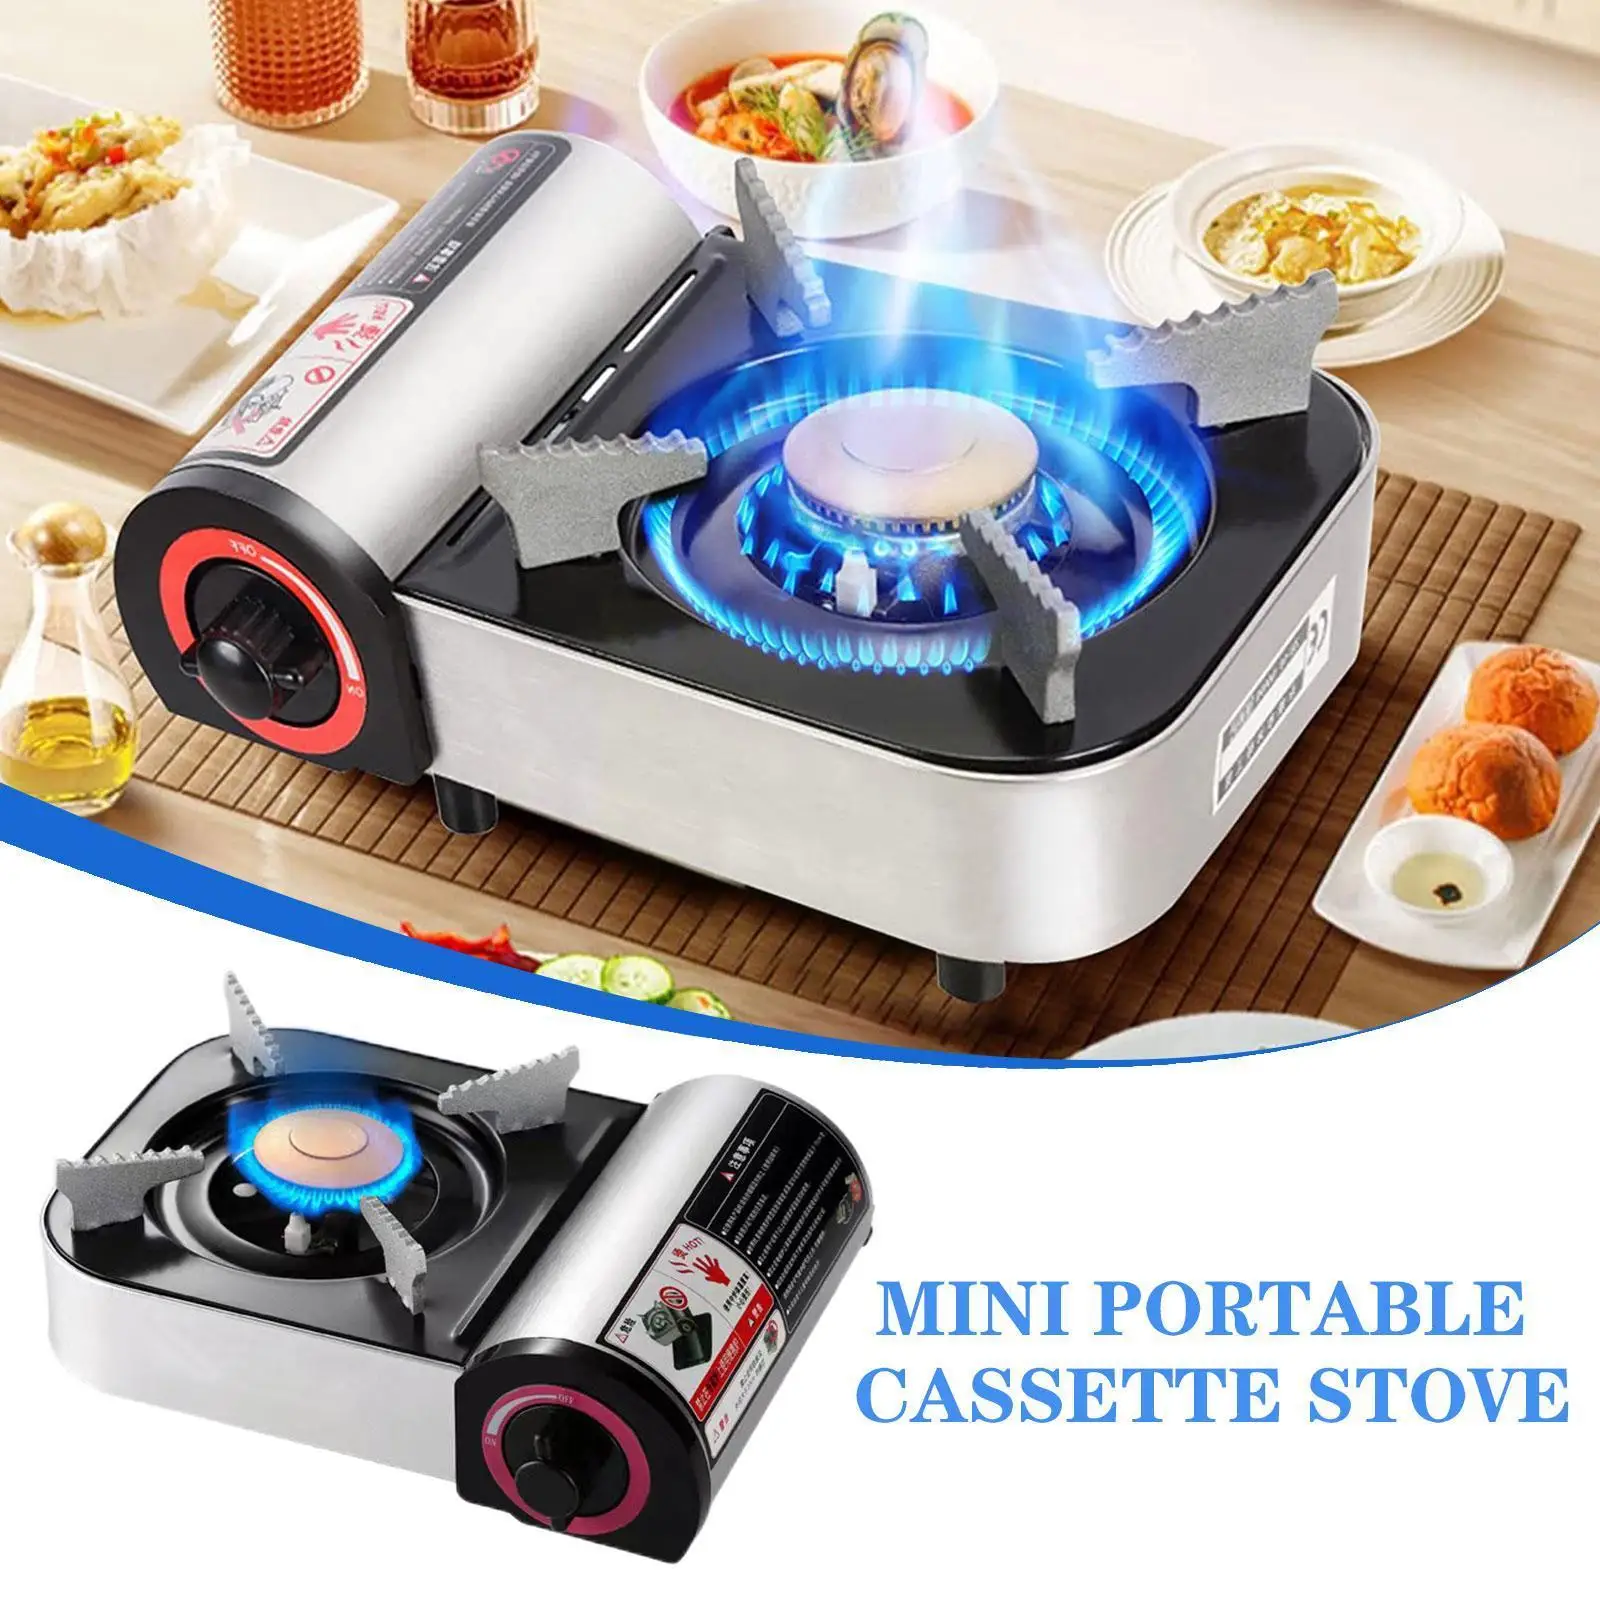 

Portable Gas Cooker Stove Cassette Butane Gas Stove Grill Picnic Camping Cooking Outdoor Tabletop Hiking Bbq Single D6e2